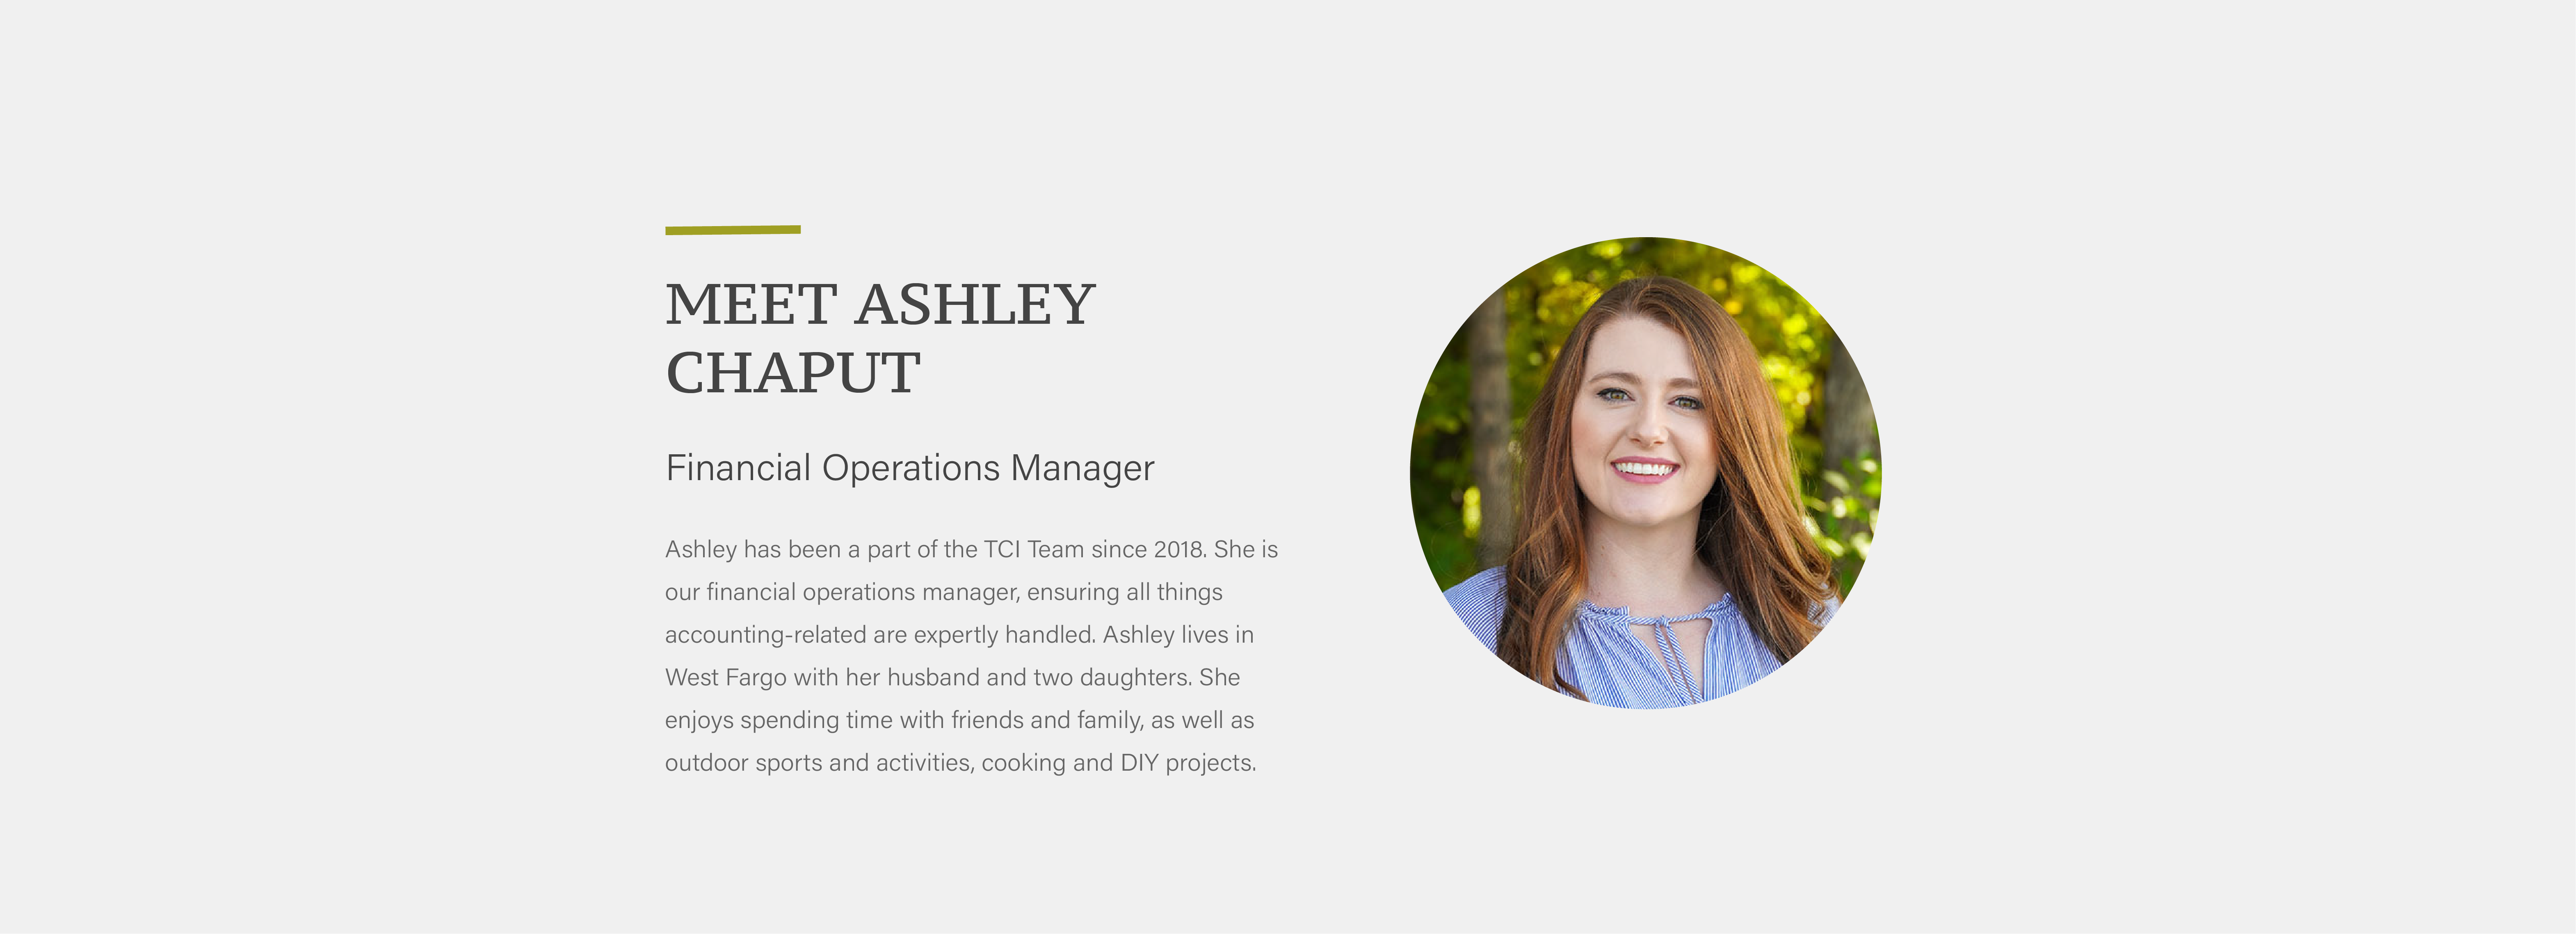 Ashley has been a part of the TCI Team since 2018. She is our financial operations manager, ensuring all things accounting-related are expertly handled. Ashley lives in West Fargo with her husband and two daughters. She enjoys spending time with friends and family, as well as outdoor sports and activities, cooking and DIY projects.